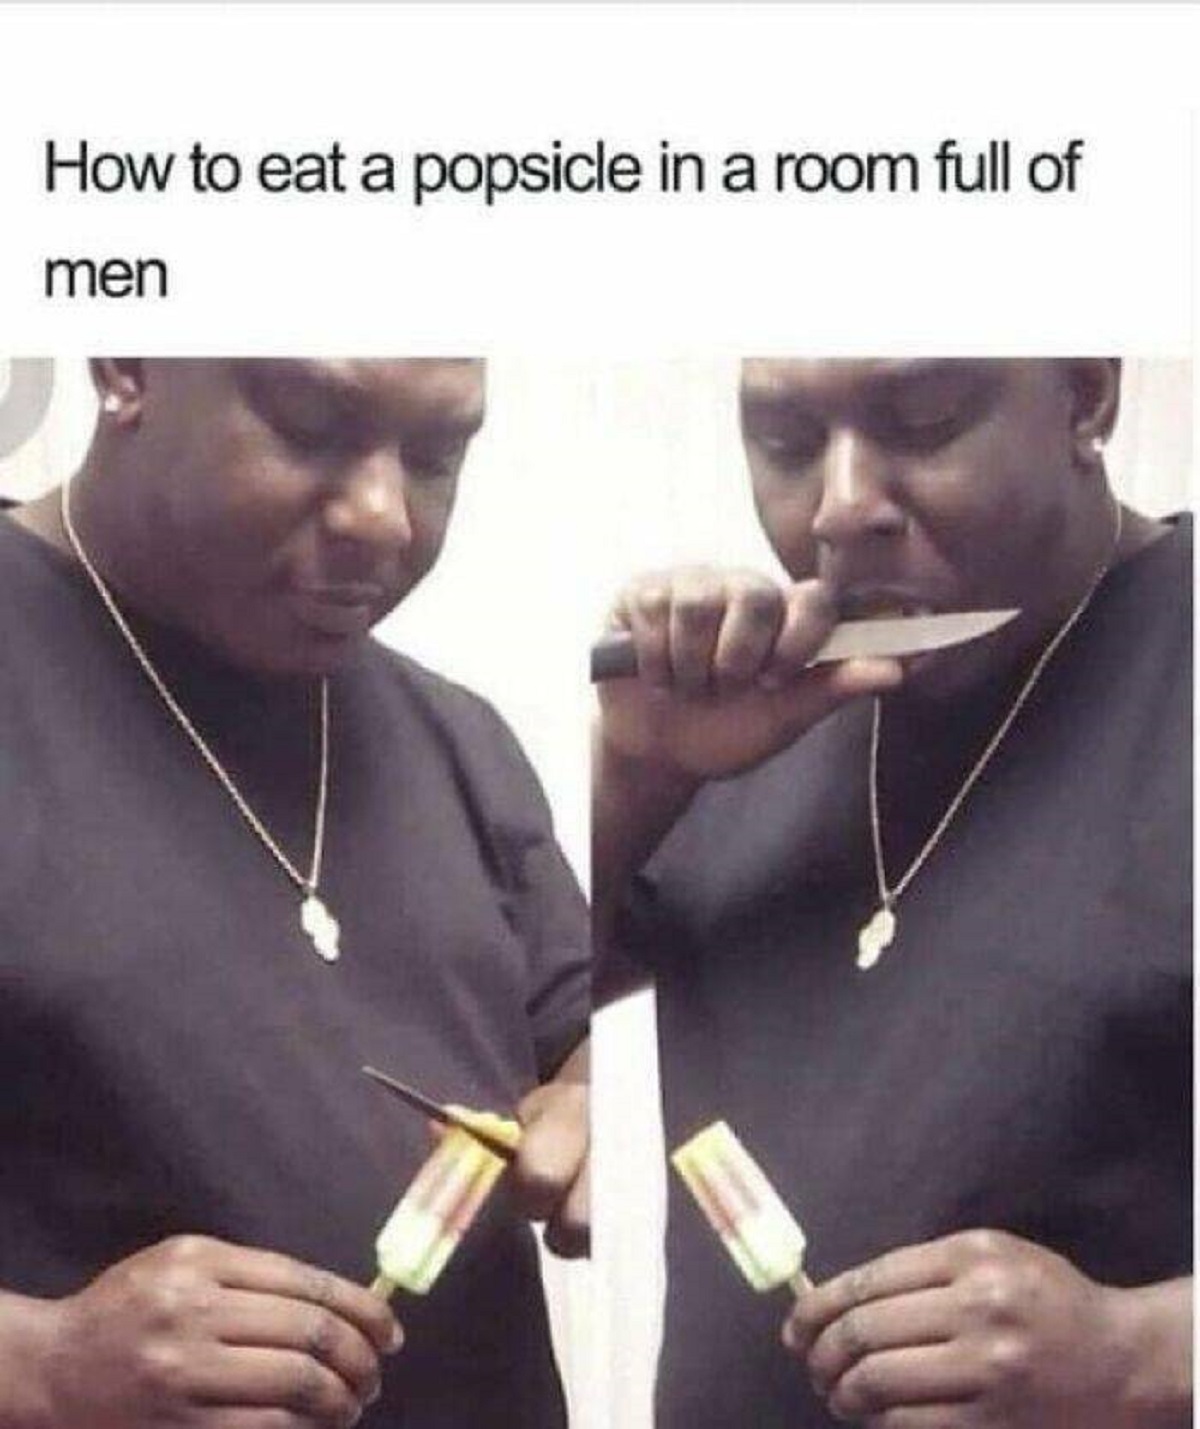 neck - How to eat a popsicle in a room full of men